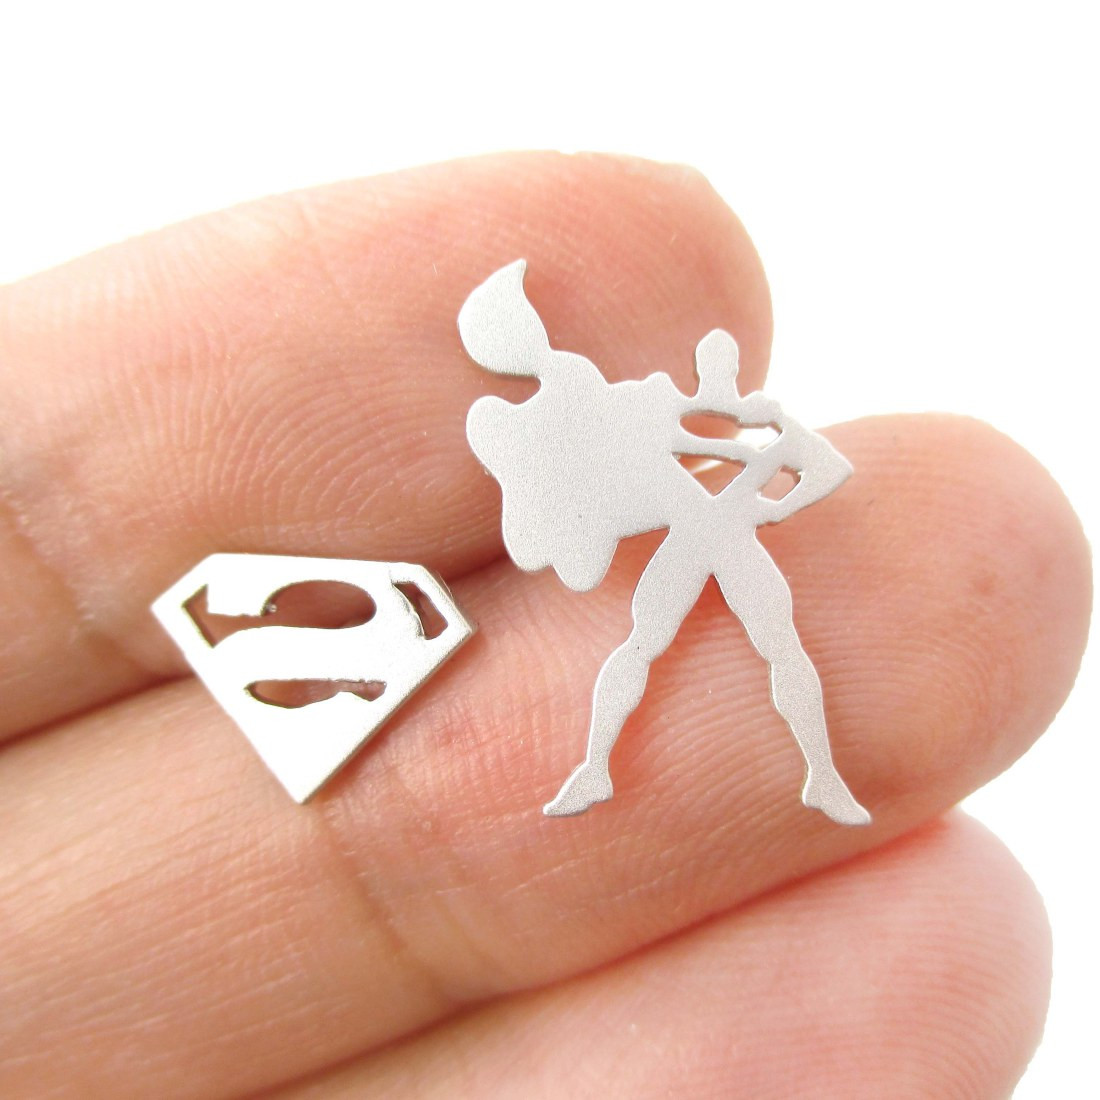 Allergy Free Earrings
 Iconic Superman Silhouette Logo Shaped Silhouette Allergy